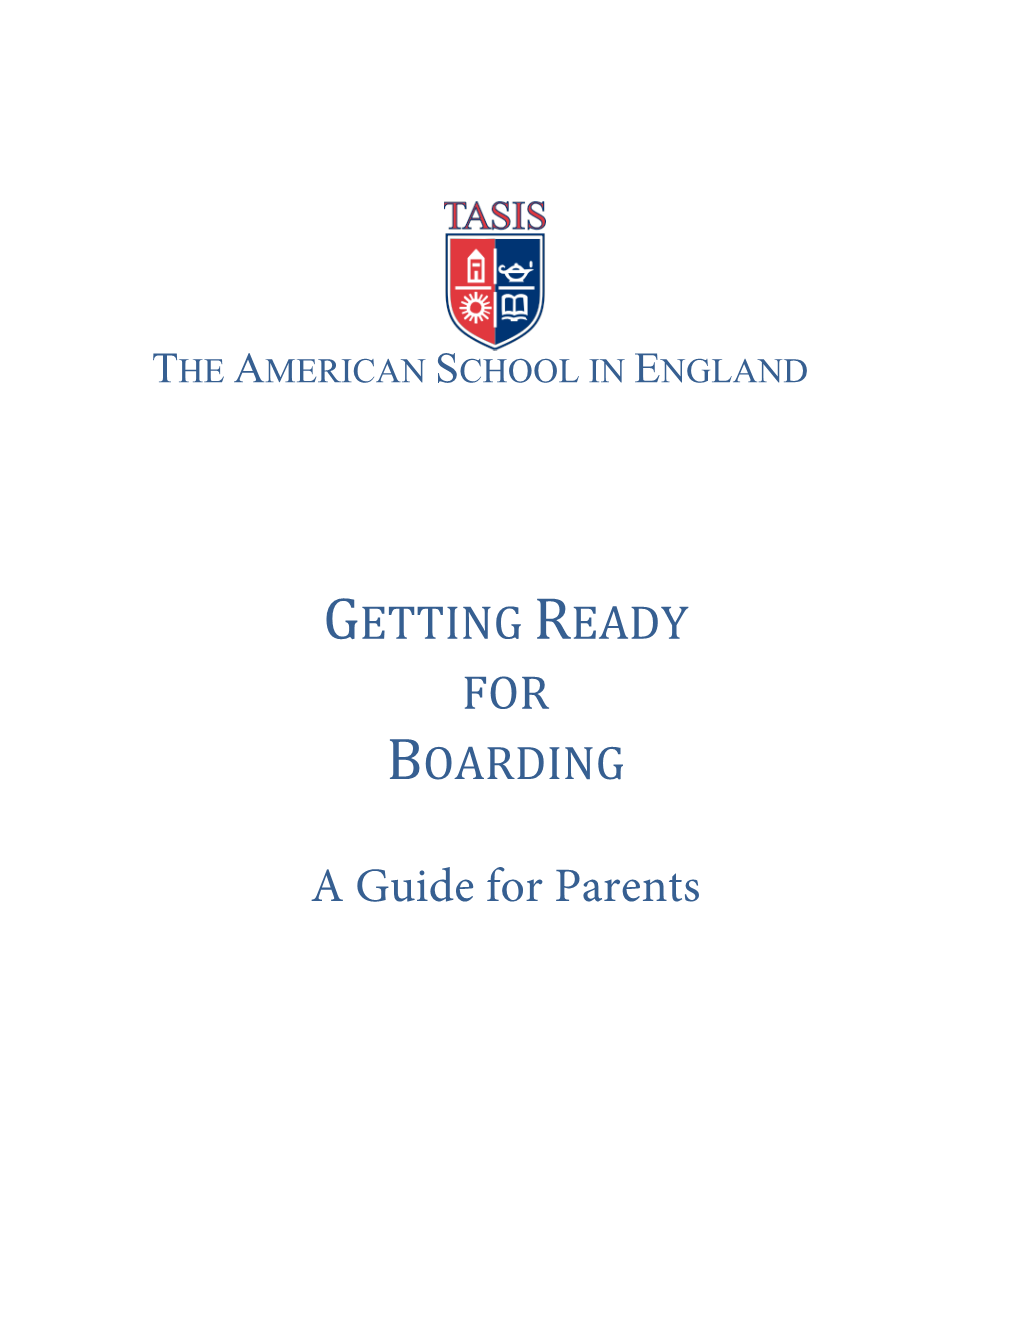 GETTING READY for BOARDING a Guide for Parents